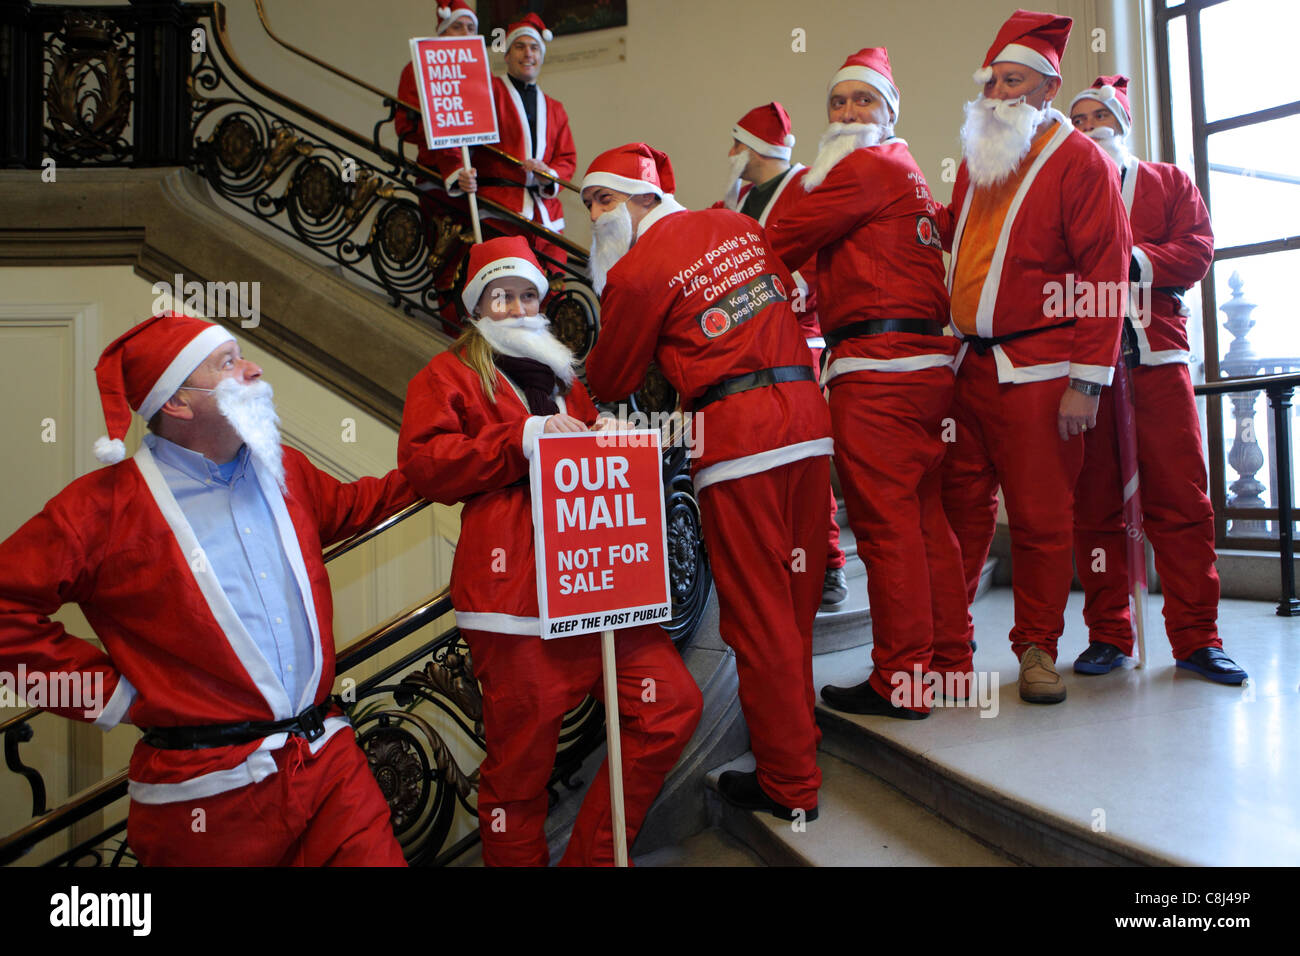 Postmen dressed as Santa Claus protesting chages to Royal Mail, job cuts, Methodist Central Hall, Westminster, London, UK Stock Photo